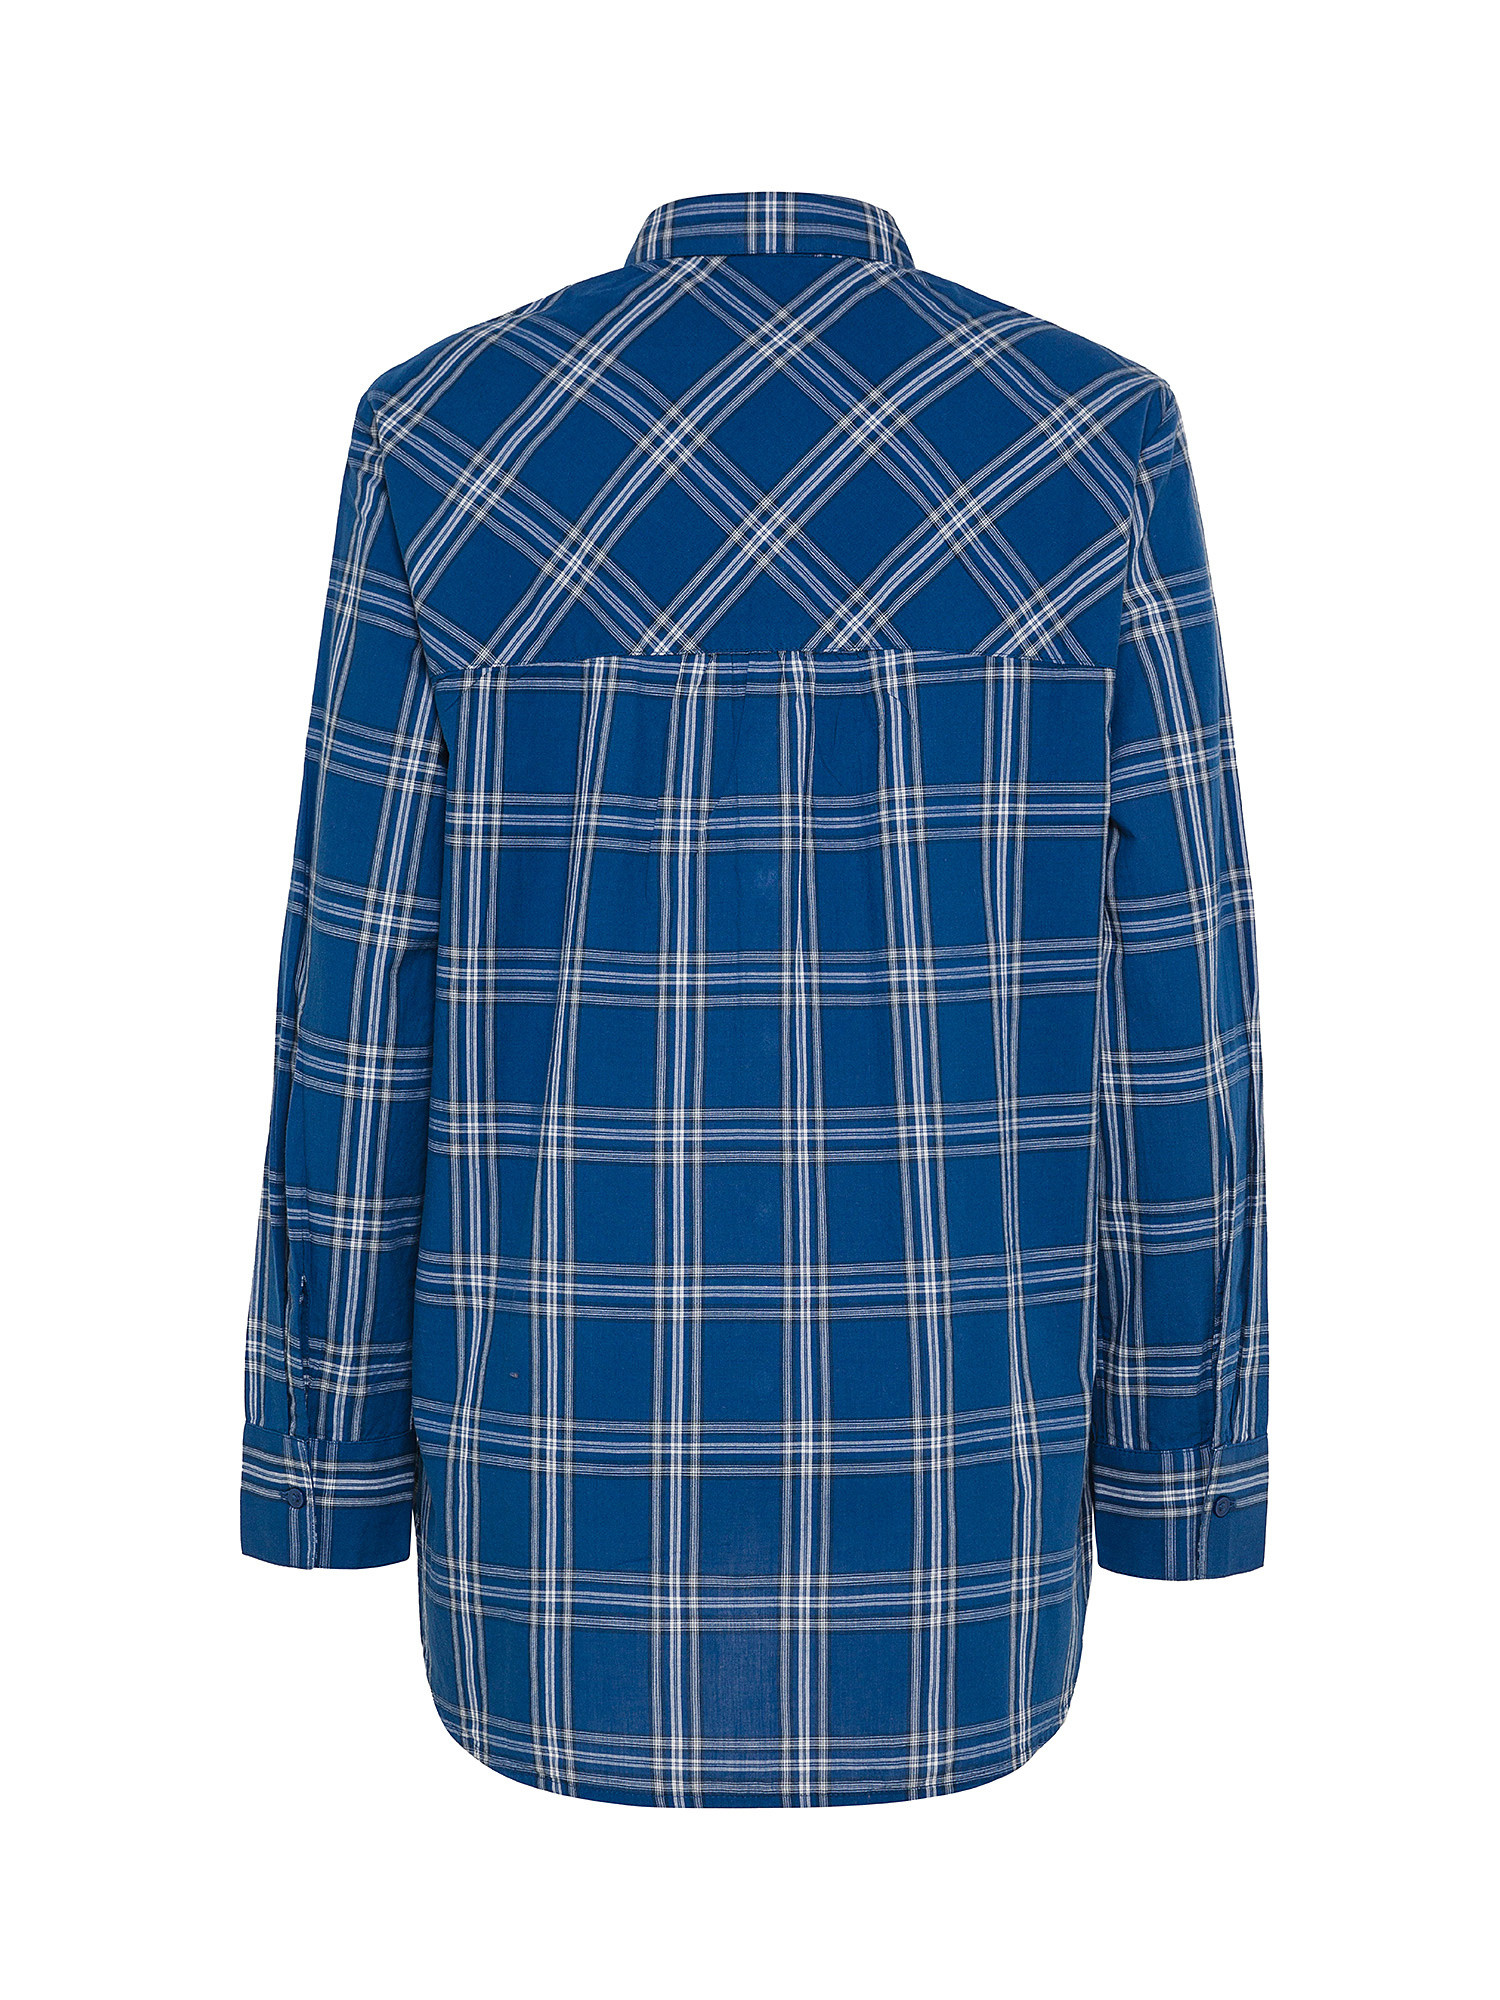 Checked blouse, Blue, large image number 1